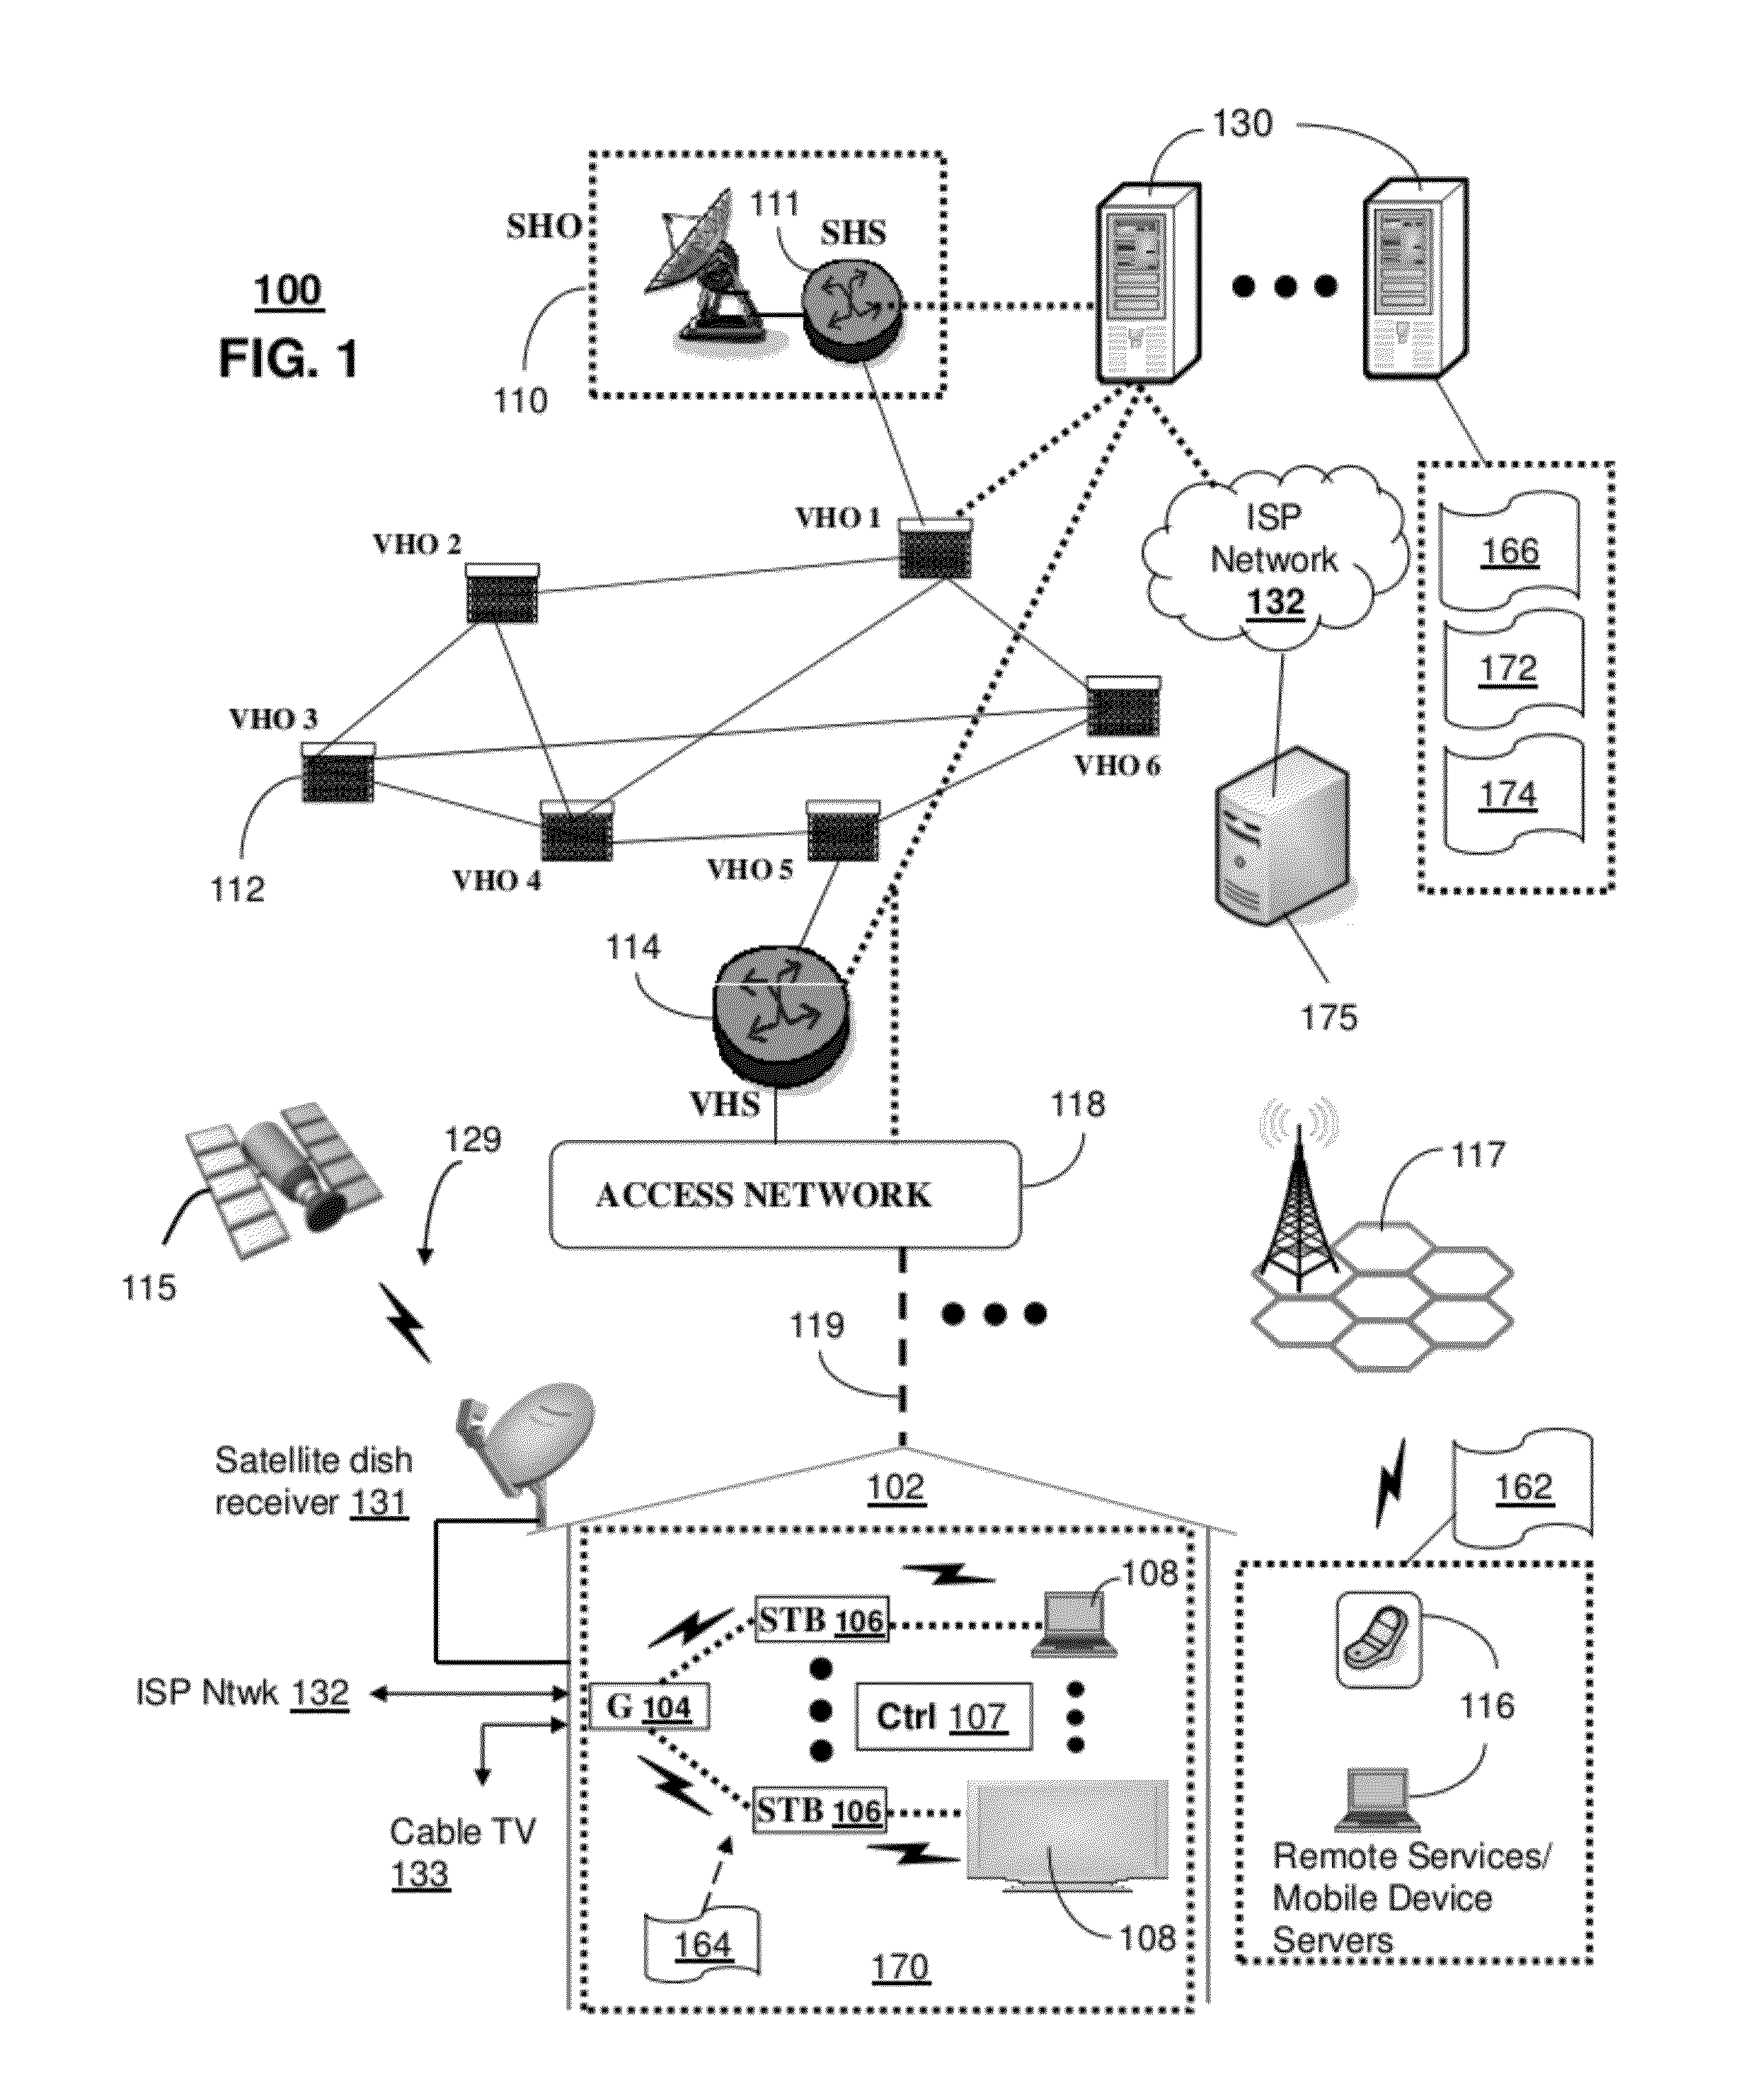 Apparatus and method for managing mobile device servers